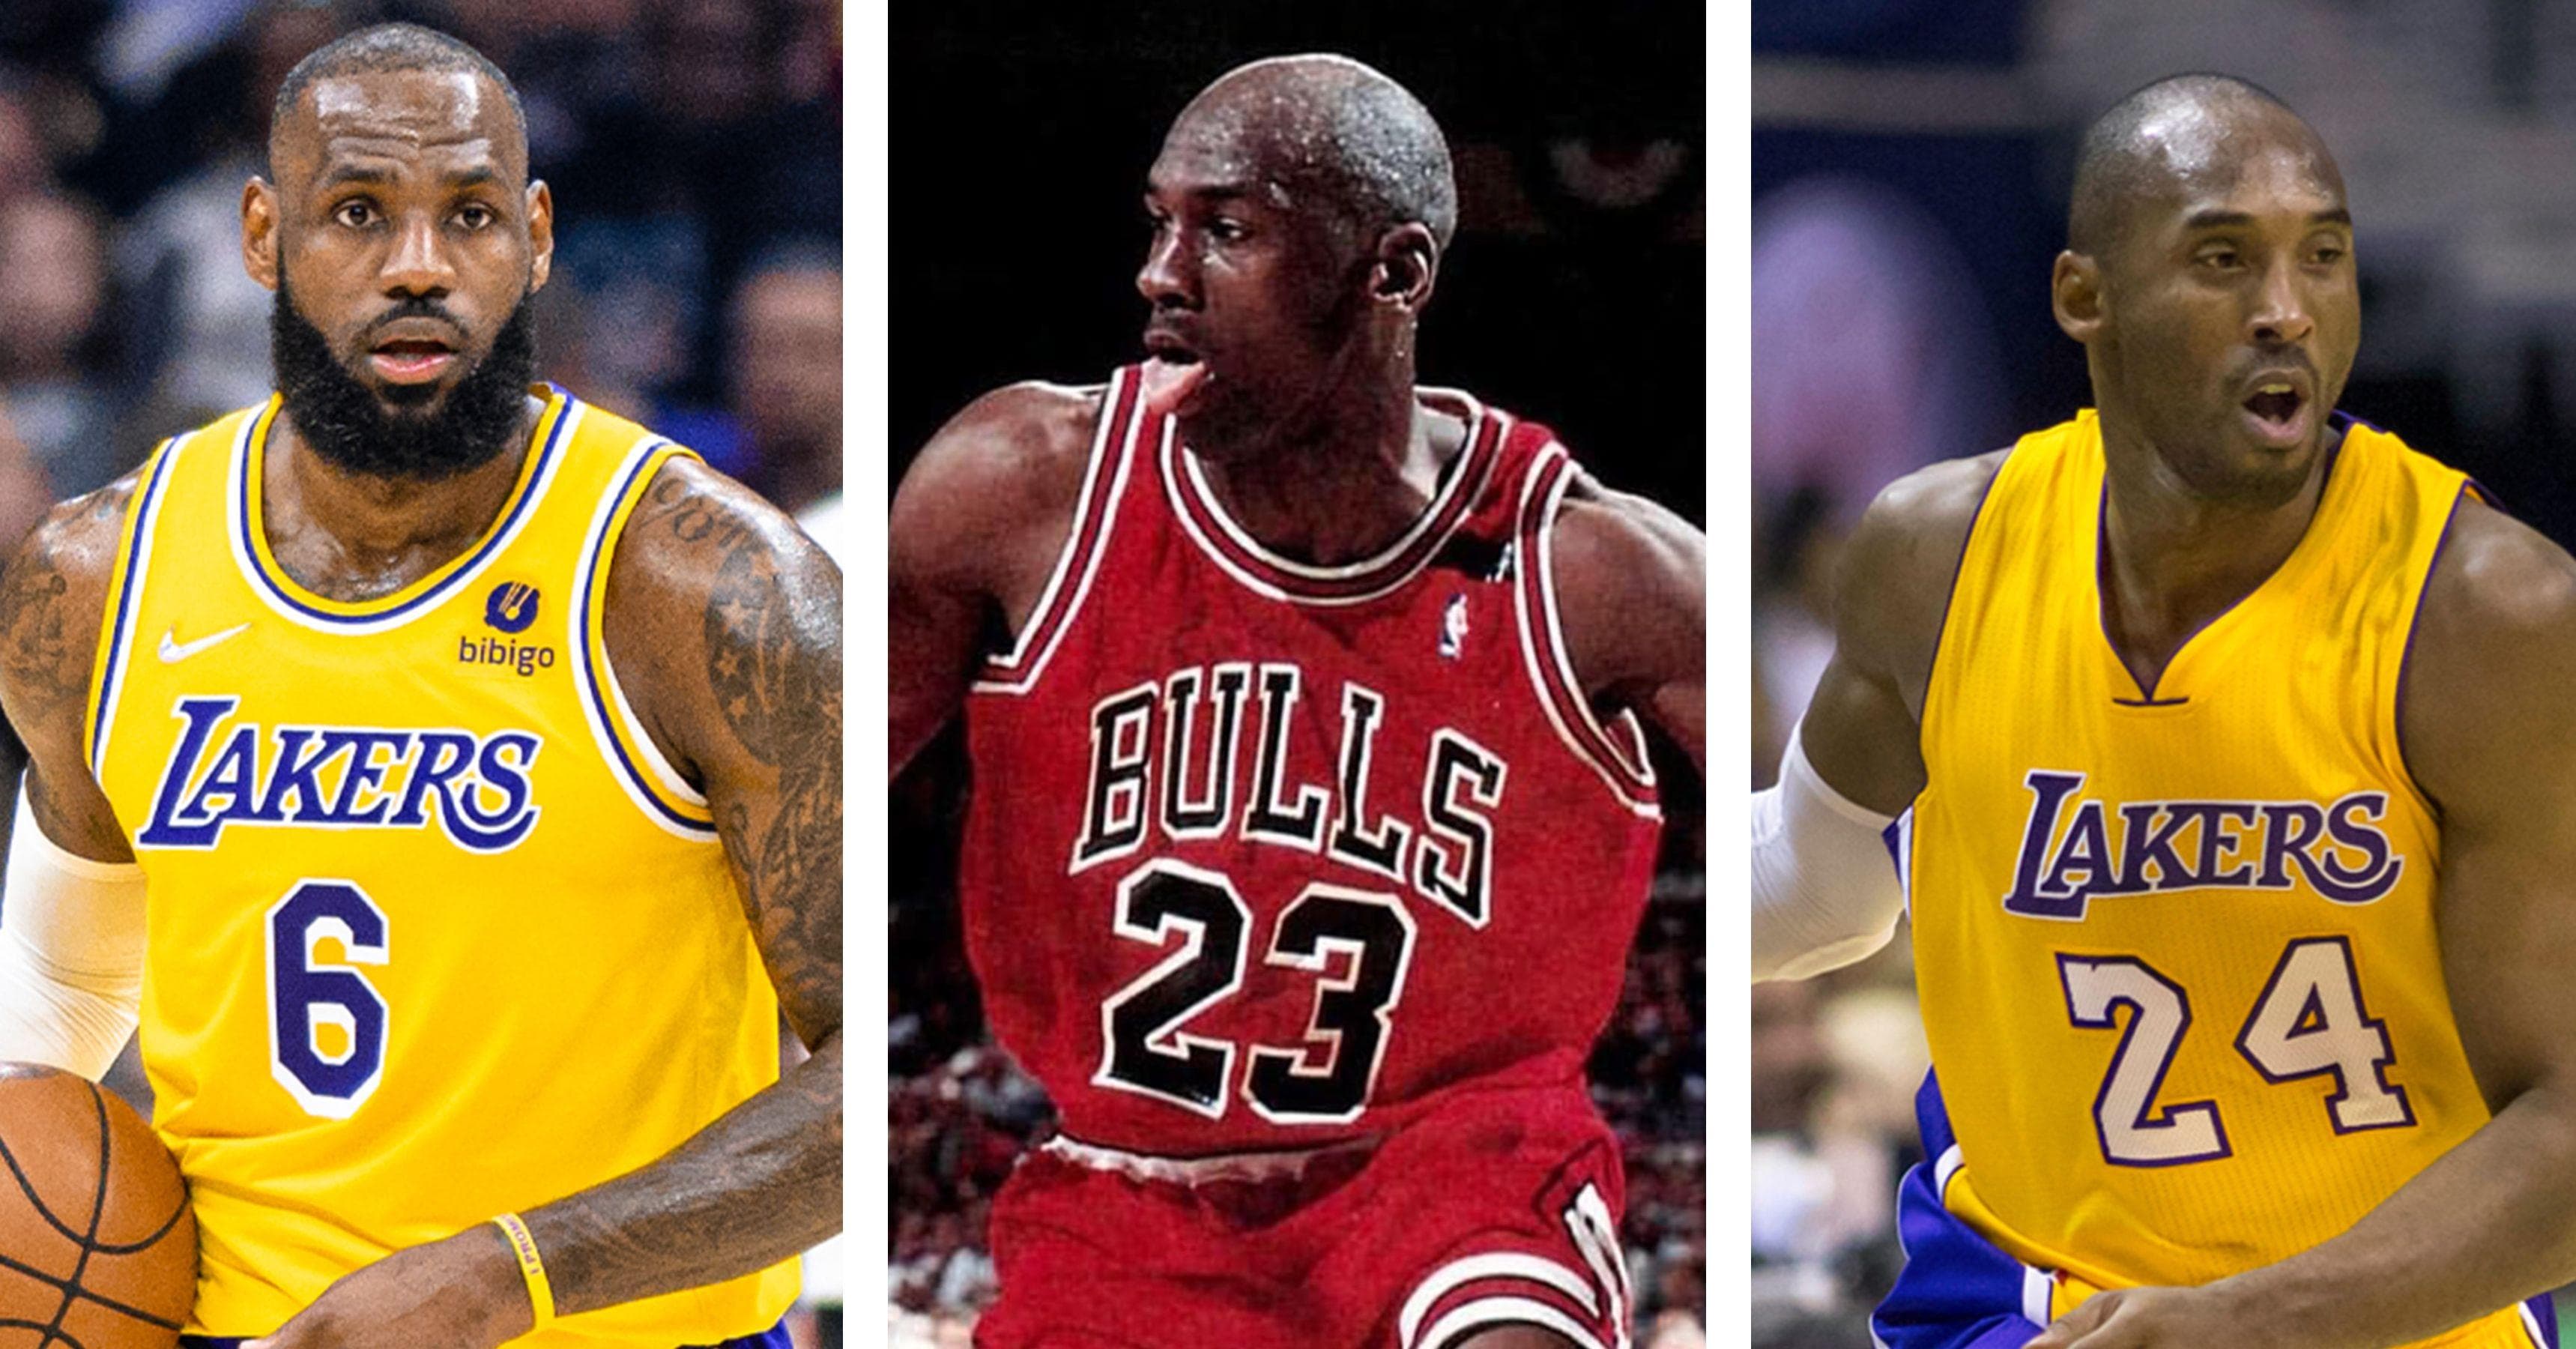 Top 50 NBA Players of All Time in NBA History (Updated List)